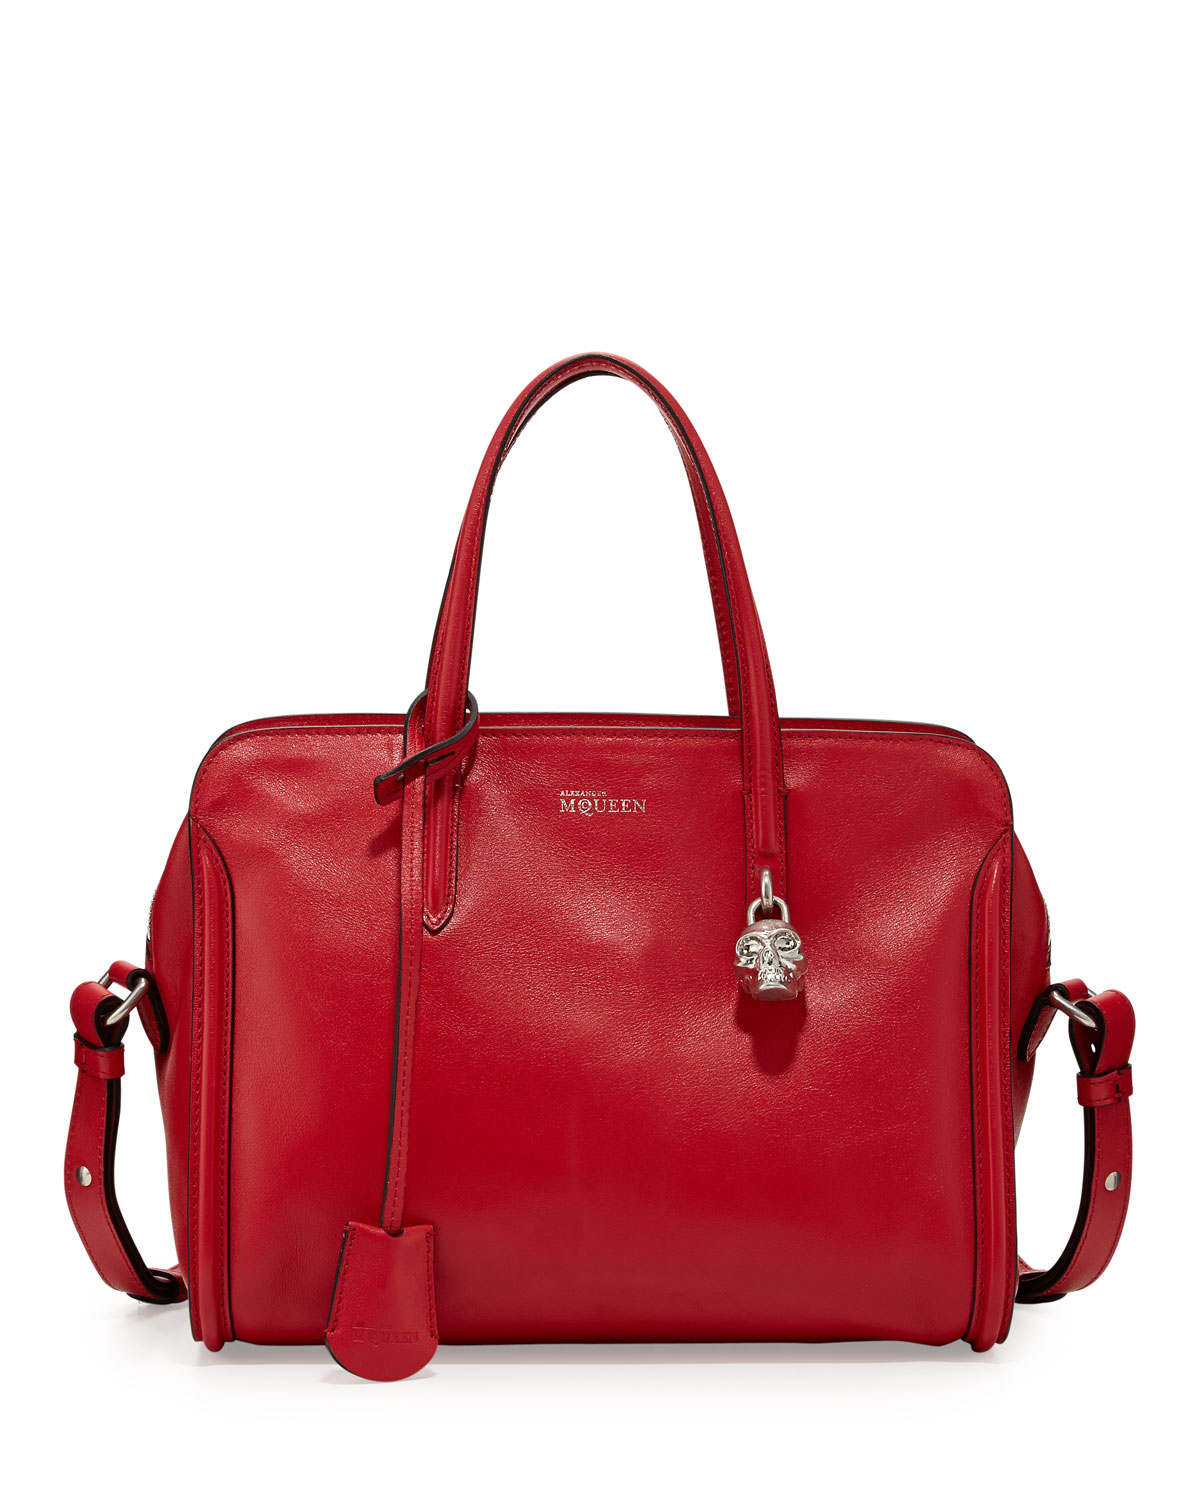 Alexander Mcqueen Small Padlock Ziparound Tote Bag Red in Red | Lyst